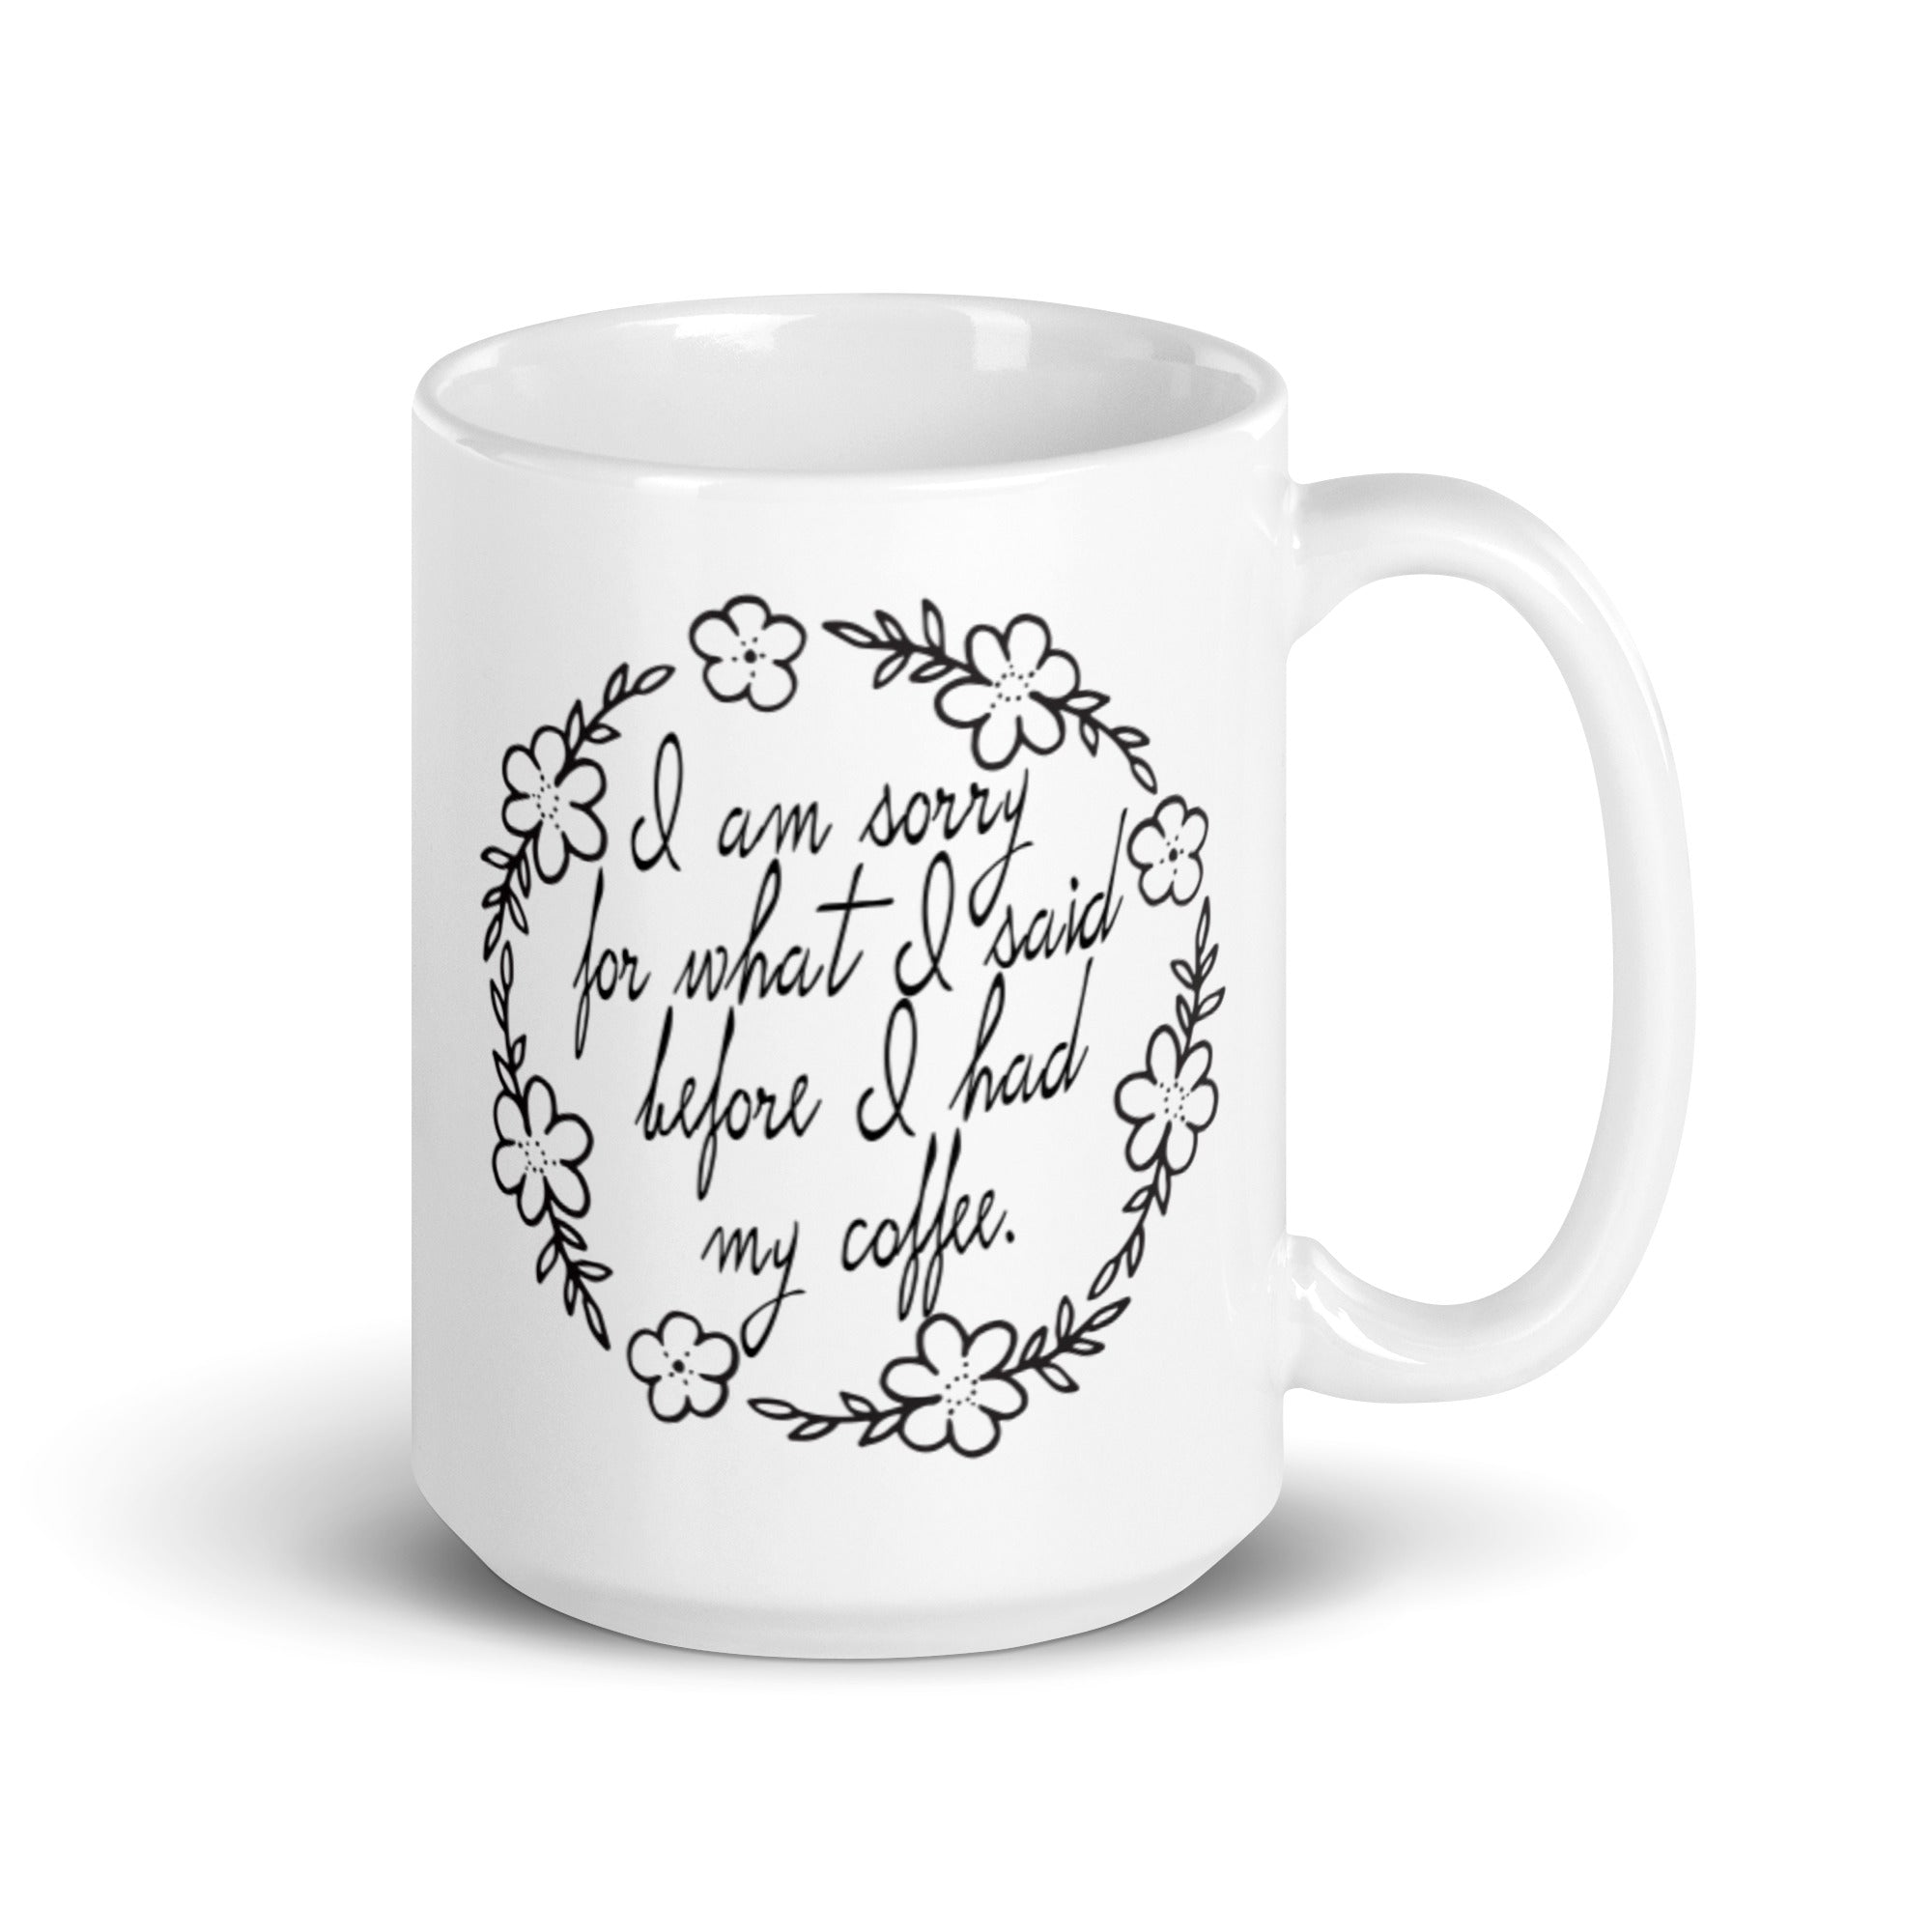 Sorry Before My Coffee Quote on Coffee Tea Cup Mug Mugs A Moment Of Now Women’s Boutique Clothing Online Lifestyle Store